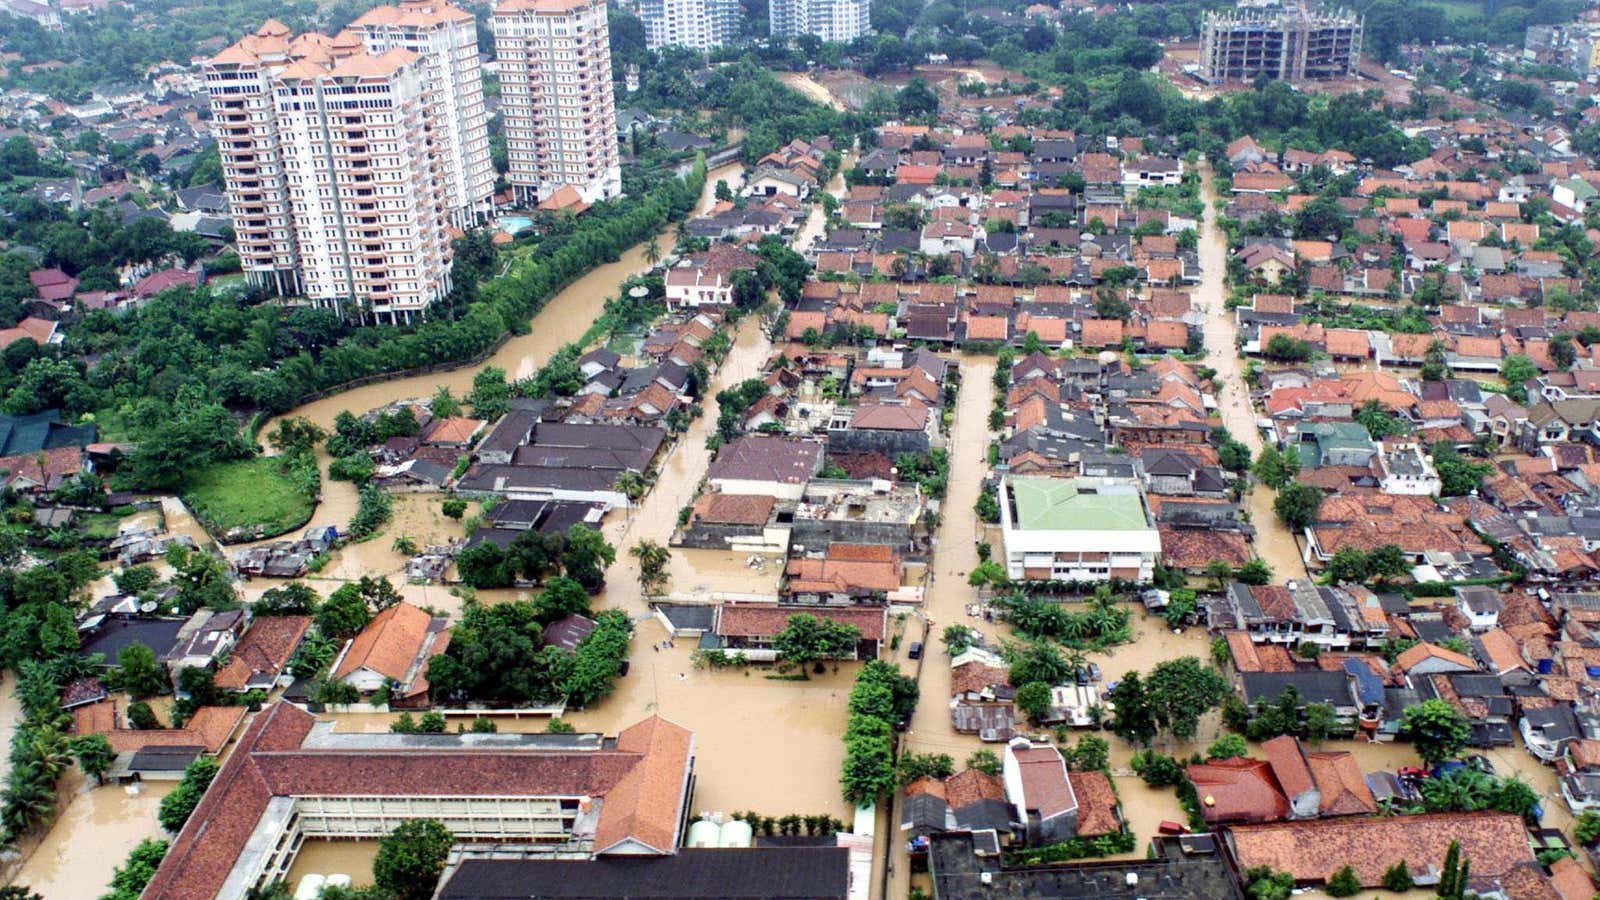 Jakarta, shown here, has been called the fastest-sinking city in the world.